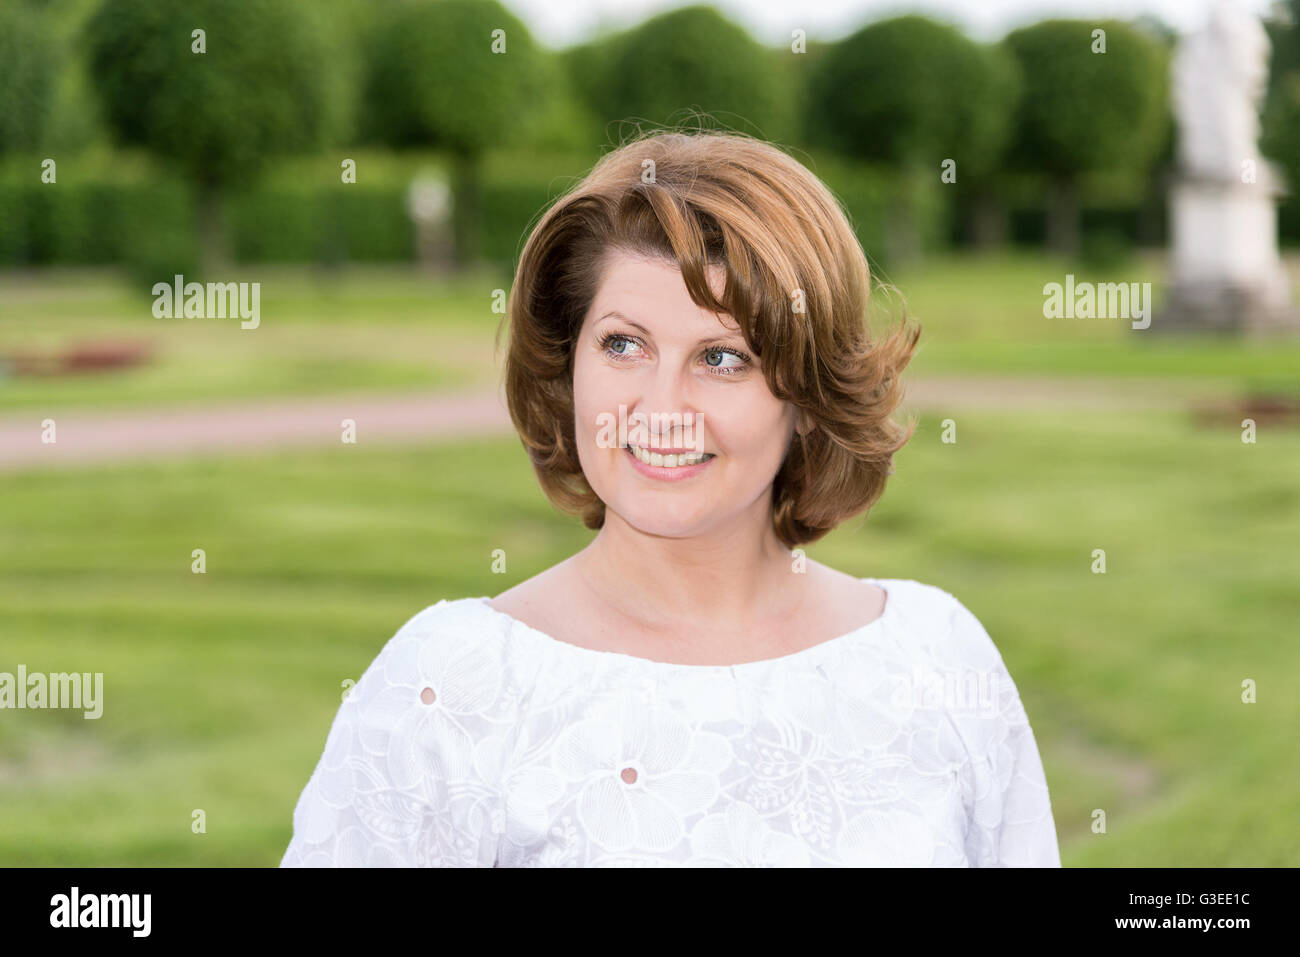 Portrait of a positive woman in a white blouse Stock Photo